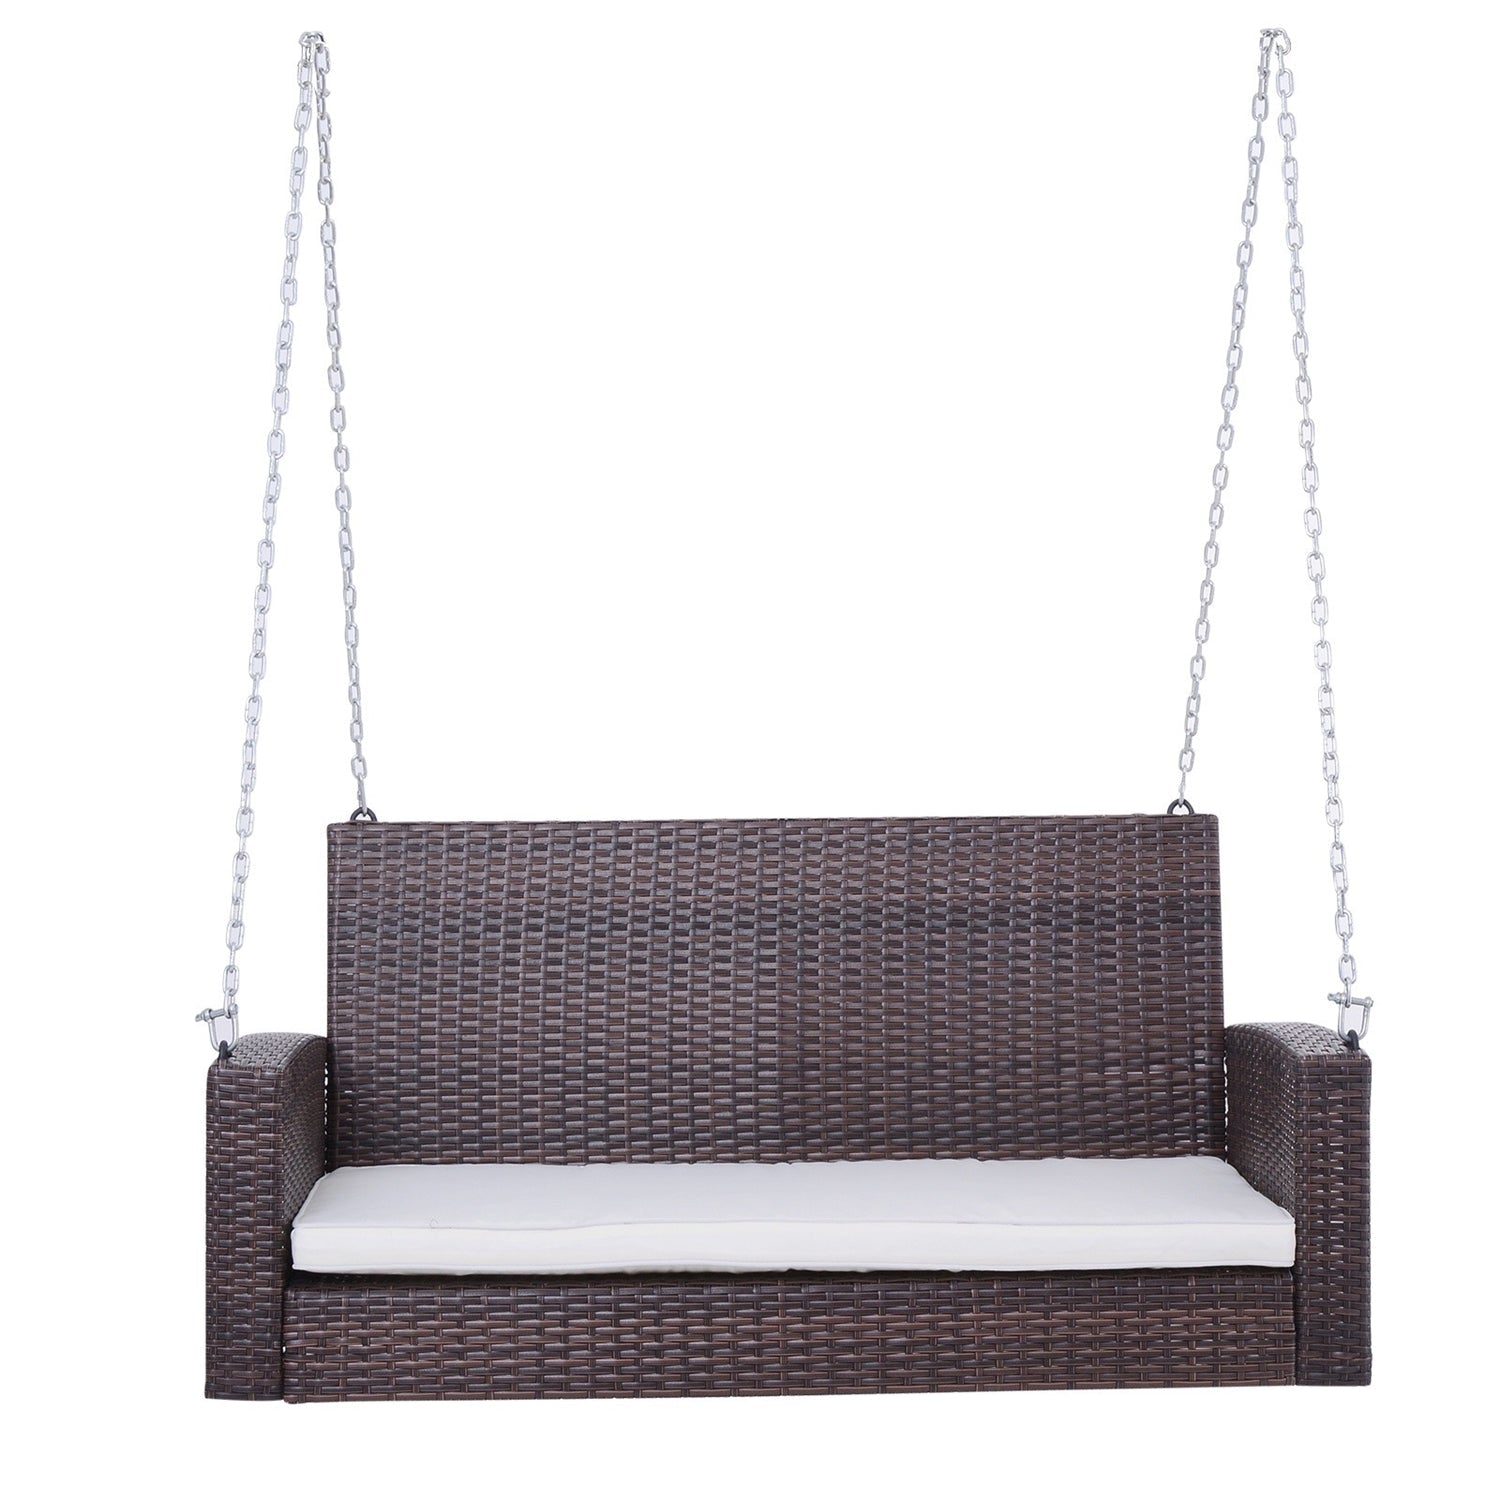 Outdoor > Outdoor Furniture > Porch Swings And Gliders - Espresso Wicker Porch Swing 7ft Hanging Chain With Cream Padded Cushion